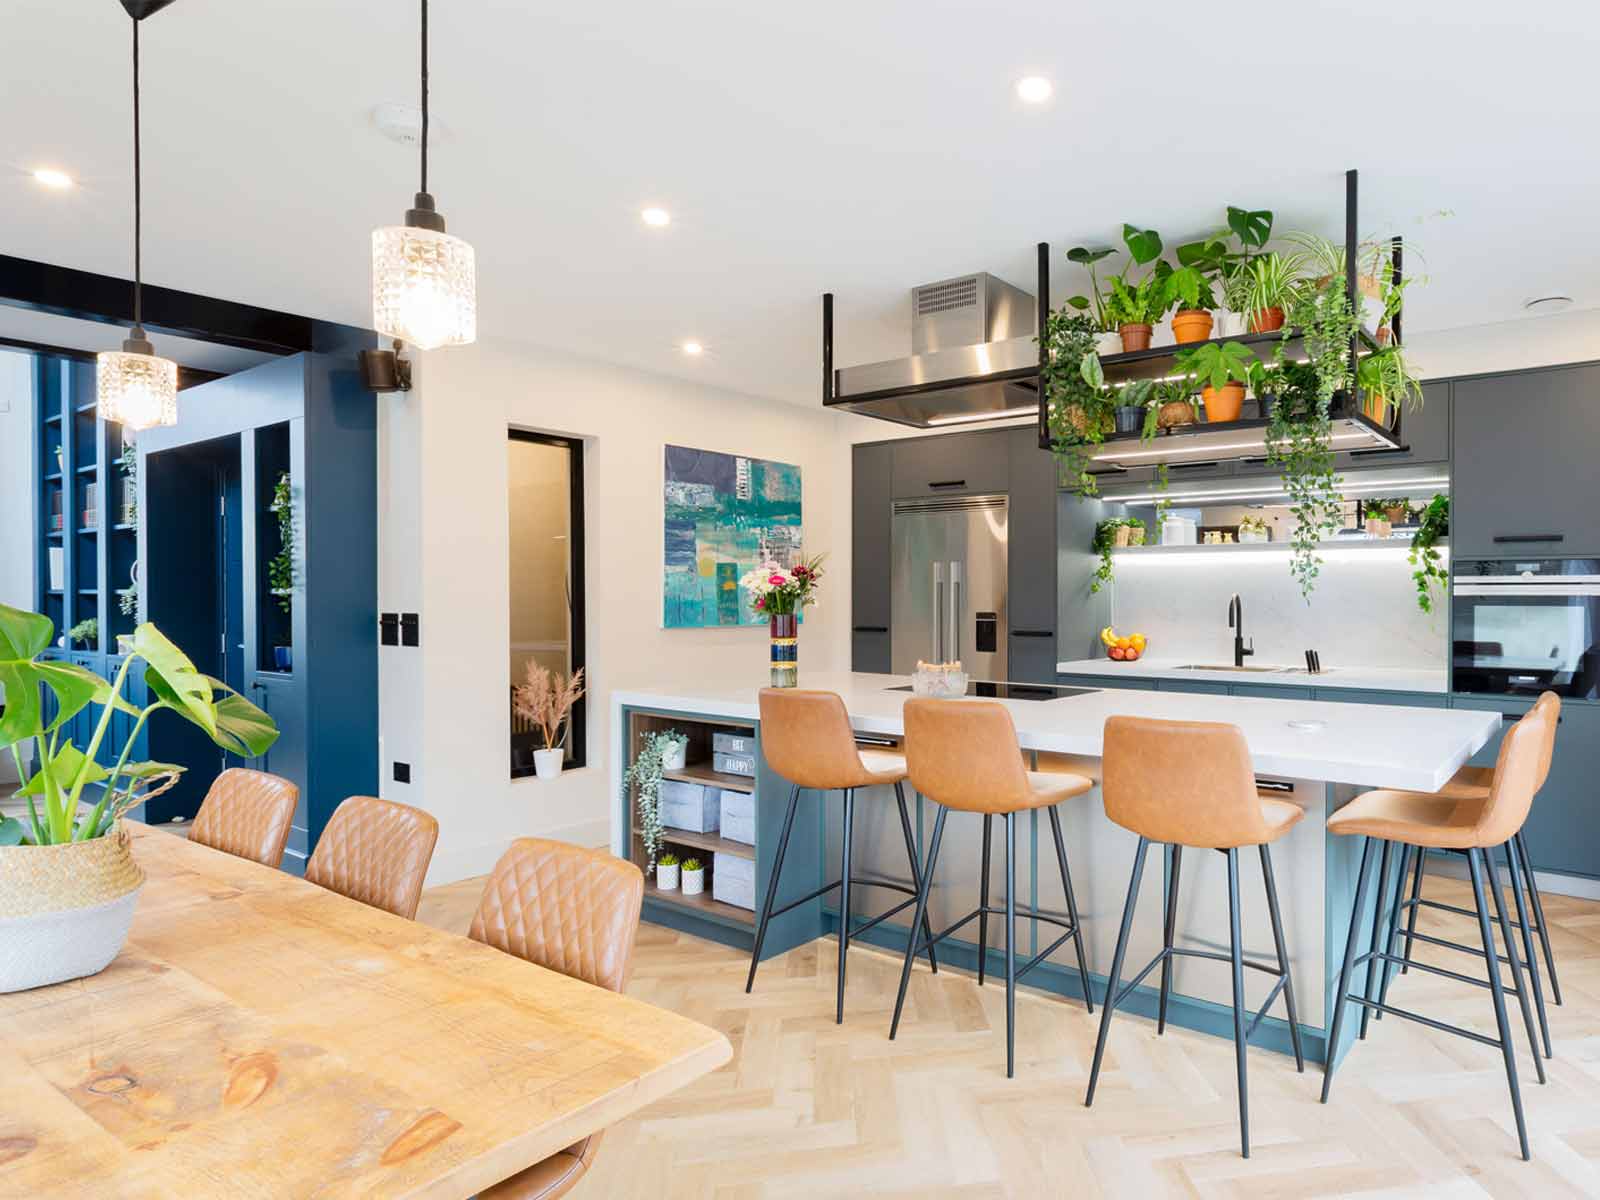 A kitchen with lots of natural light, following biophilic design best practices